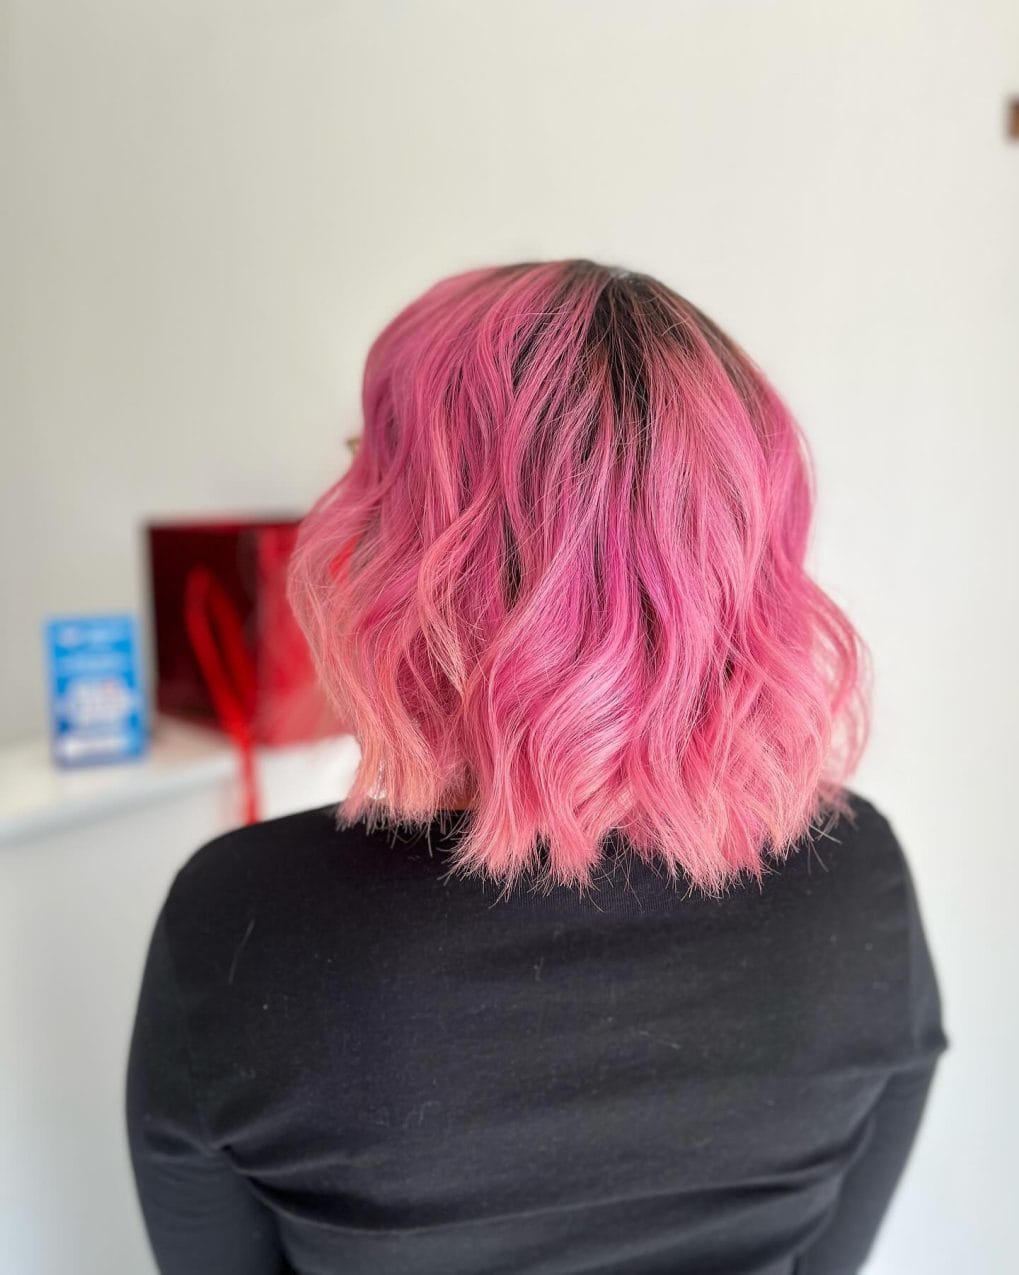 Sweet yet edgy bubblegum pink bob with playful layers